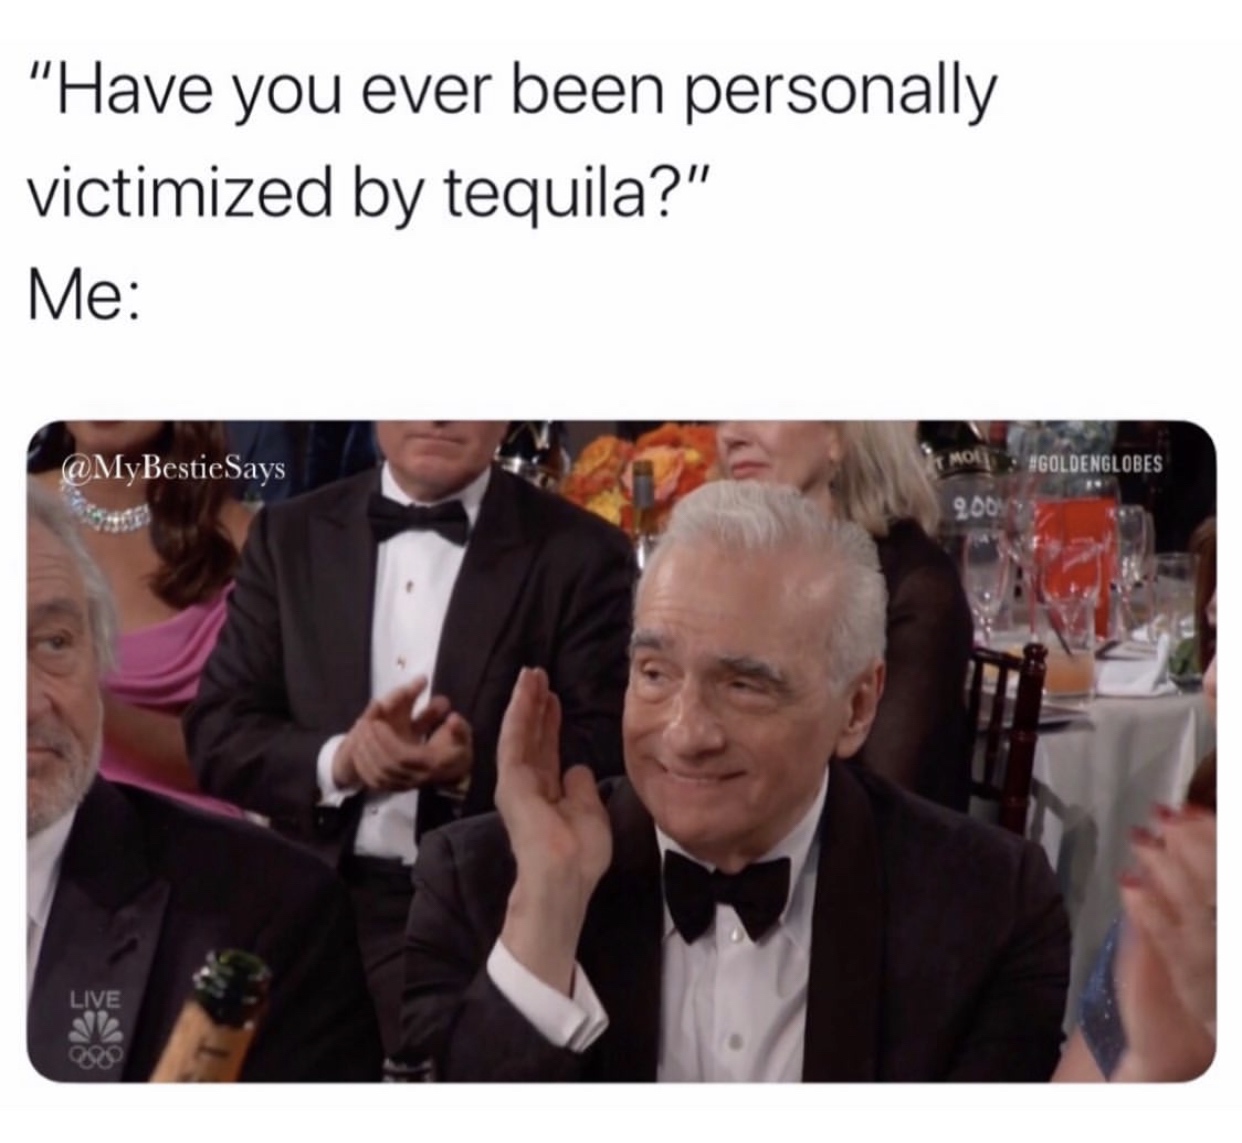 conversation - "Have you ever been personally victimized by tequila?" Me Says I Molt Goldenglobes 2009 Live